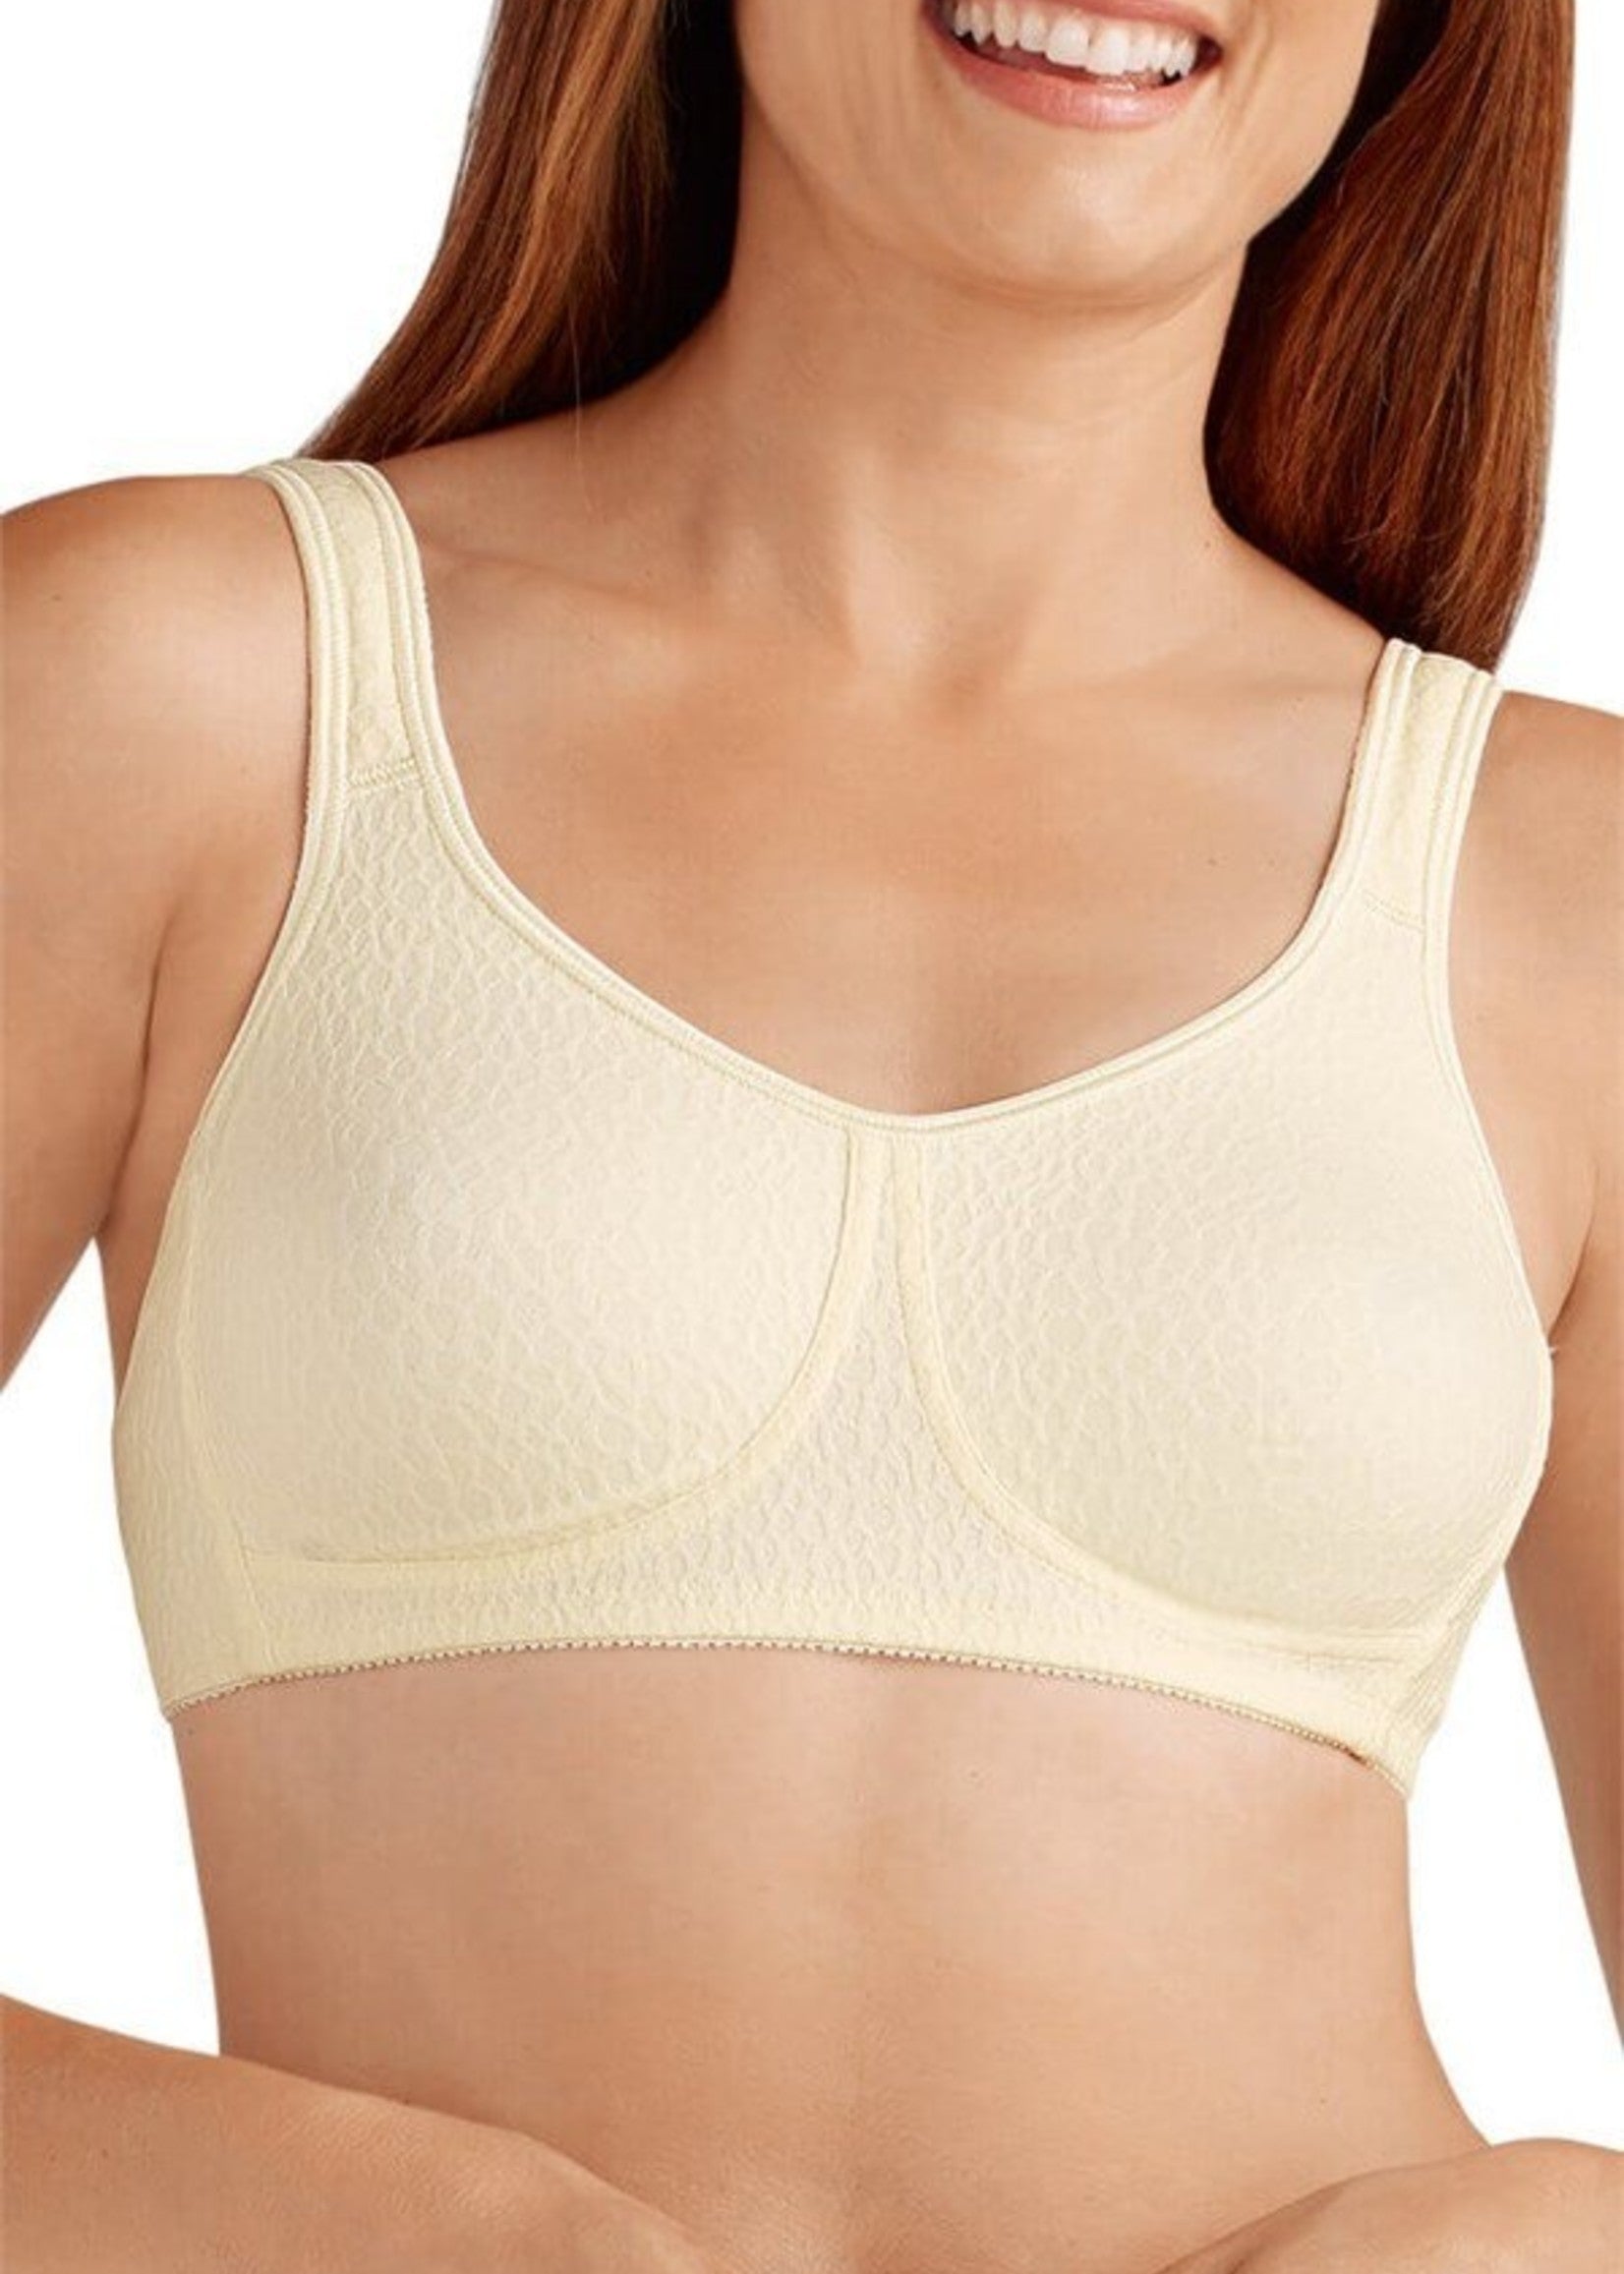 Buy Sloggi Double Comfort Top Non Wired Bra from Next South Africa